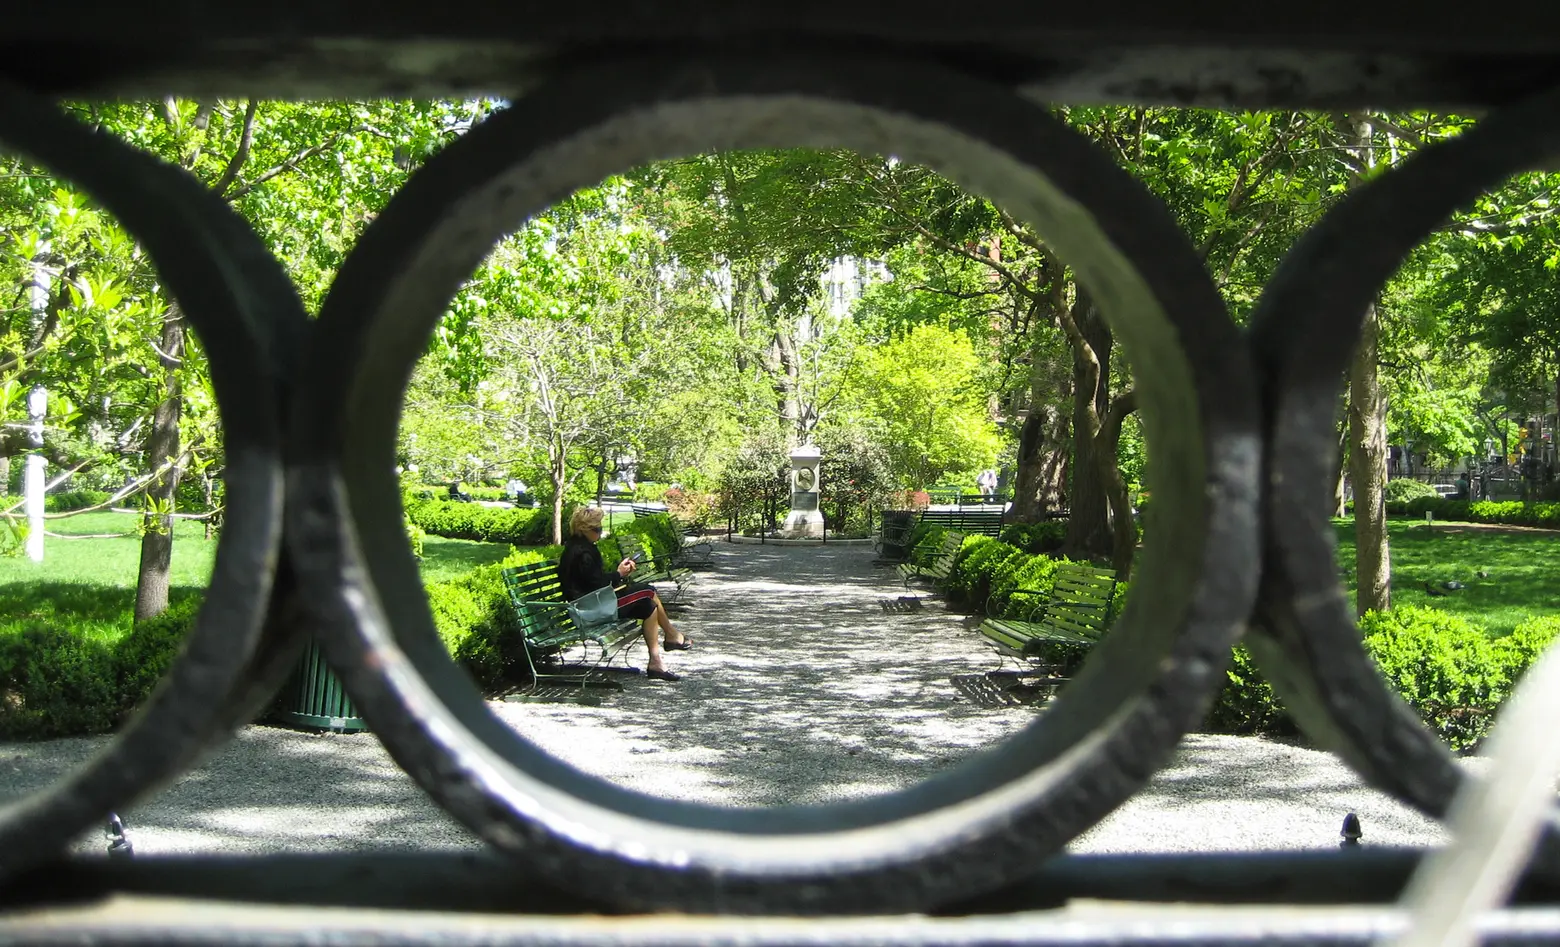 On Christmas Eve, the public can go inside Gramercy Park for one hour